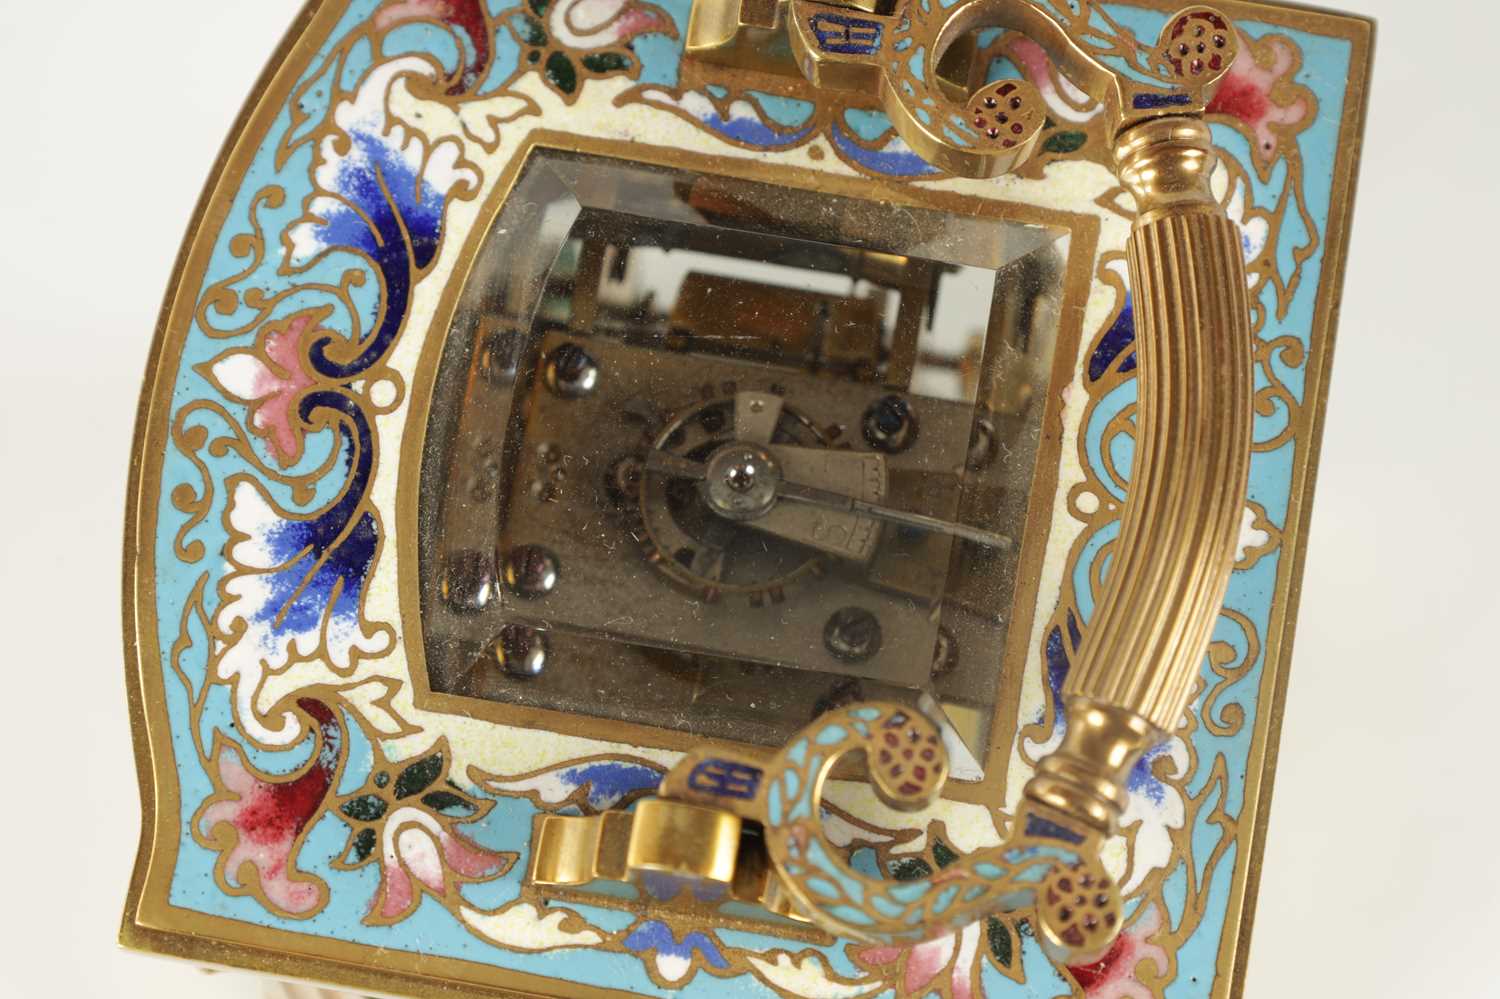 A LATE 19TH CENTURY FRENCH CHAMPLEVE ENAMEL STRIKING CARRIAGE CLOCK - Image 8 of 8